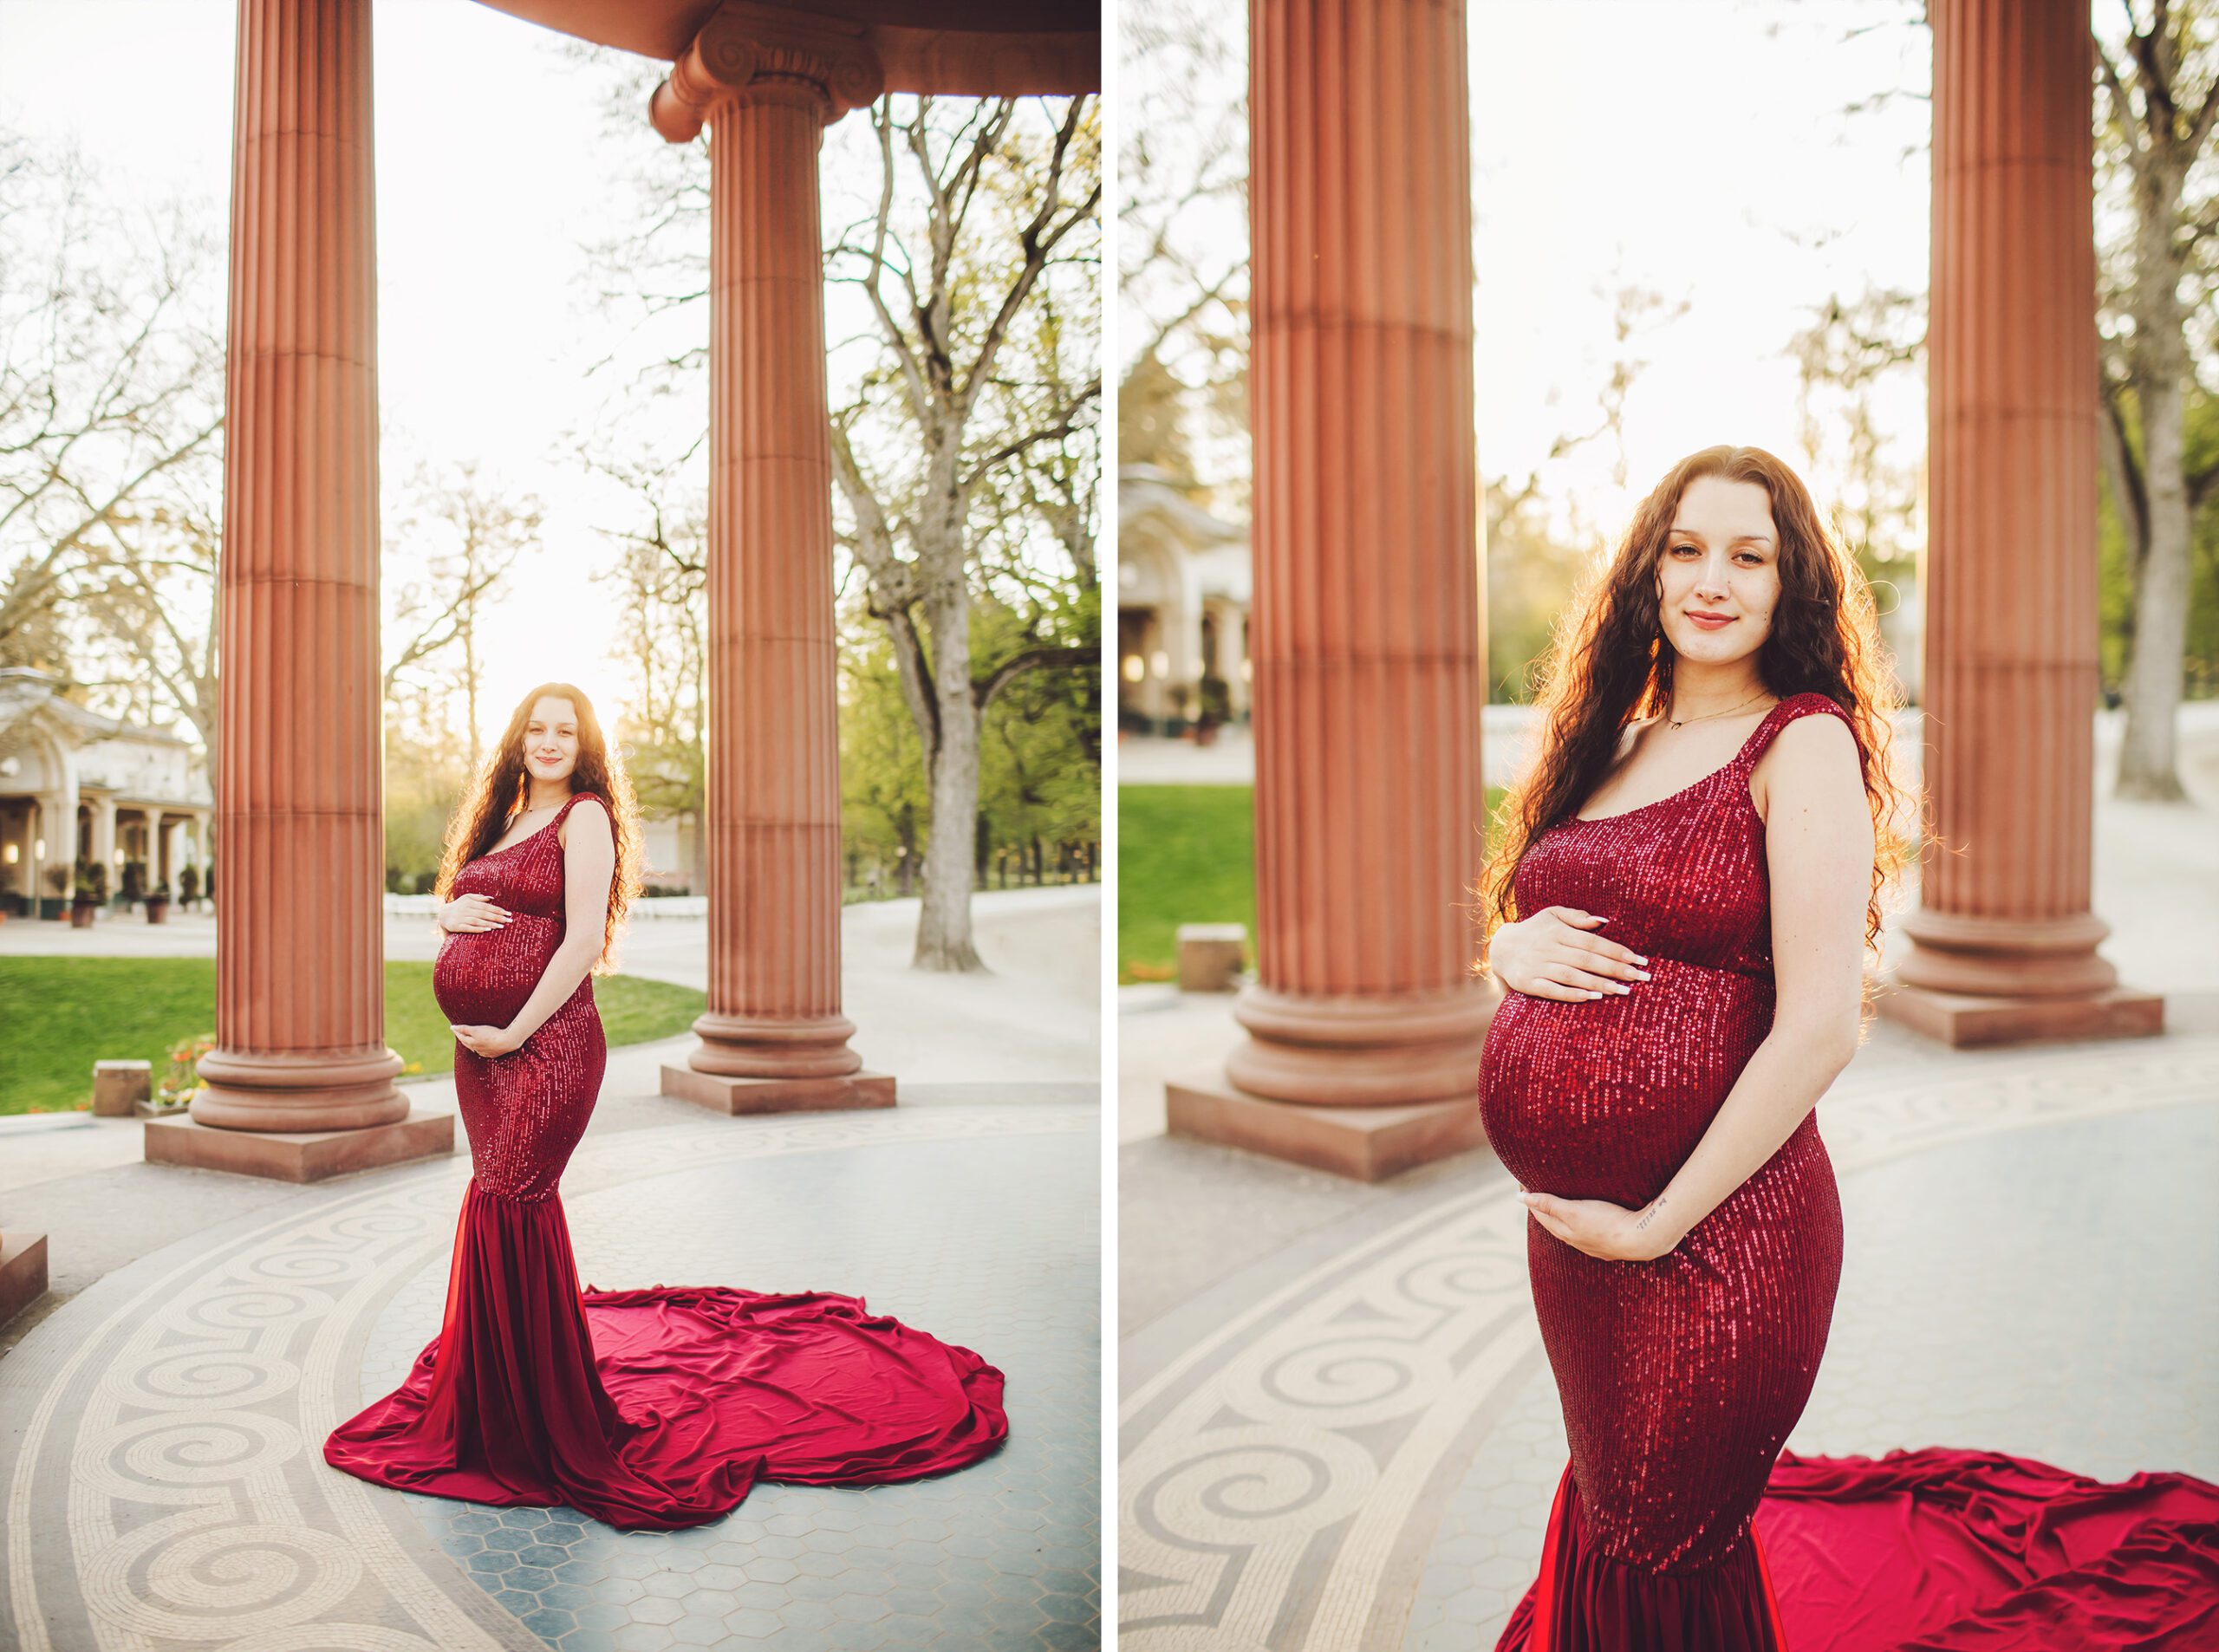 The Bad Homburg Kurpark was a spectacular and elegant location for Kallyn's maternity session.